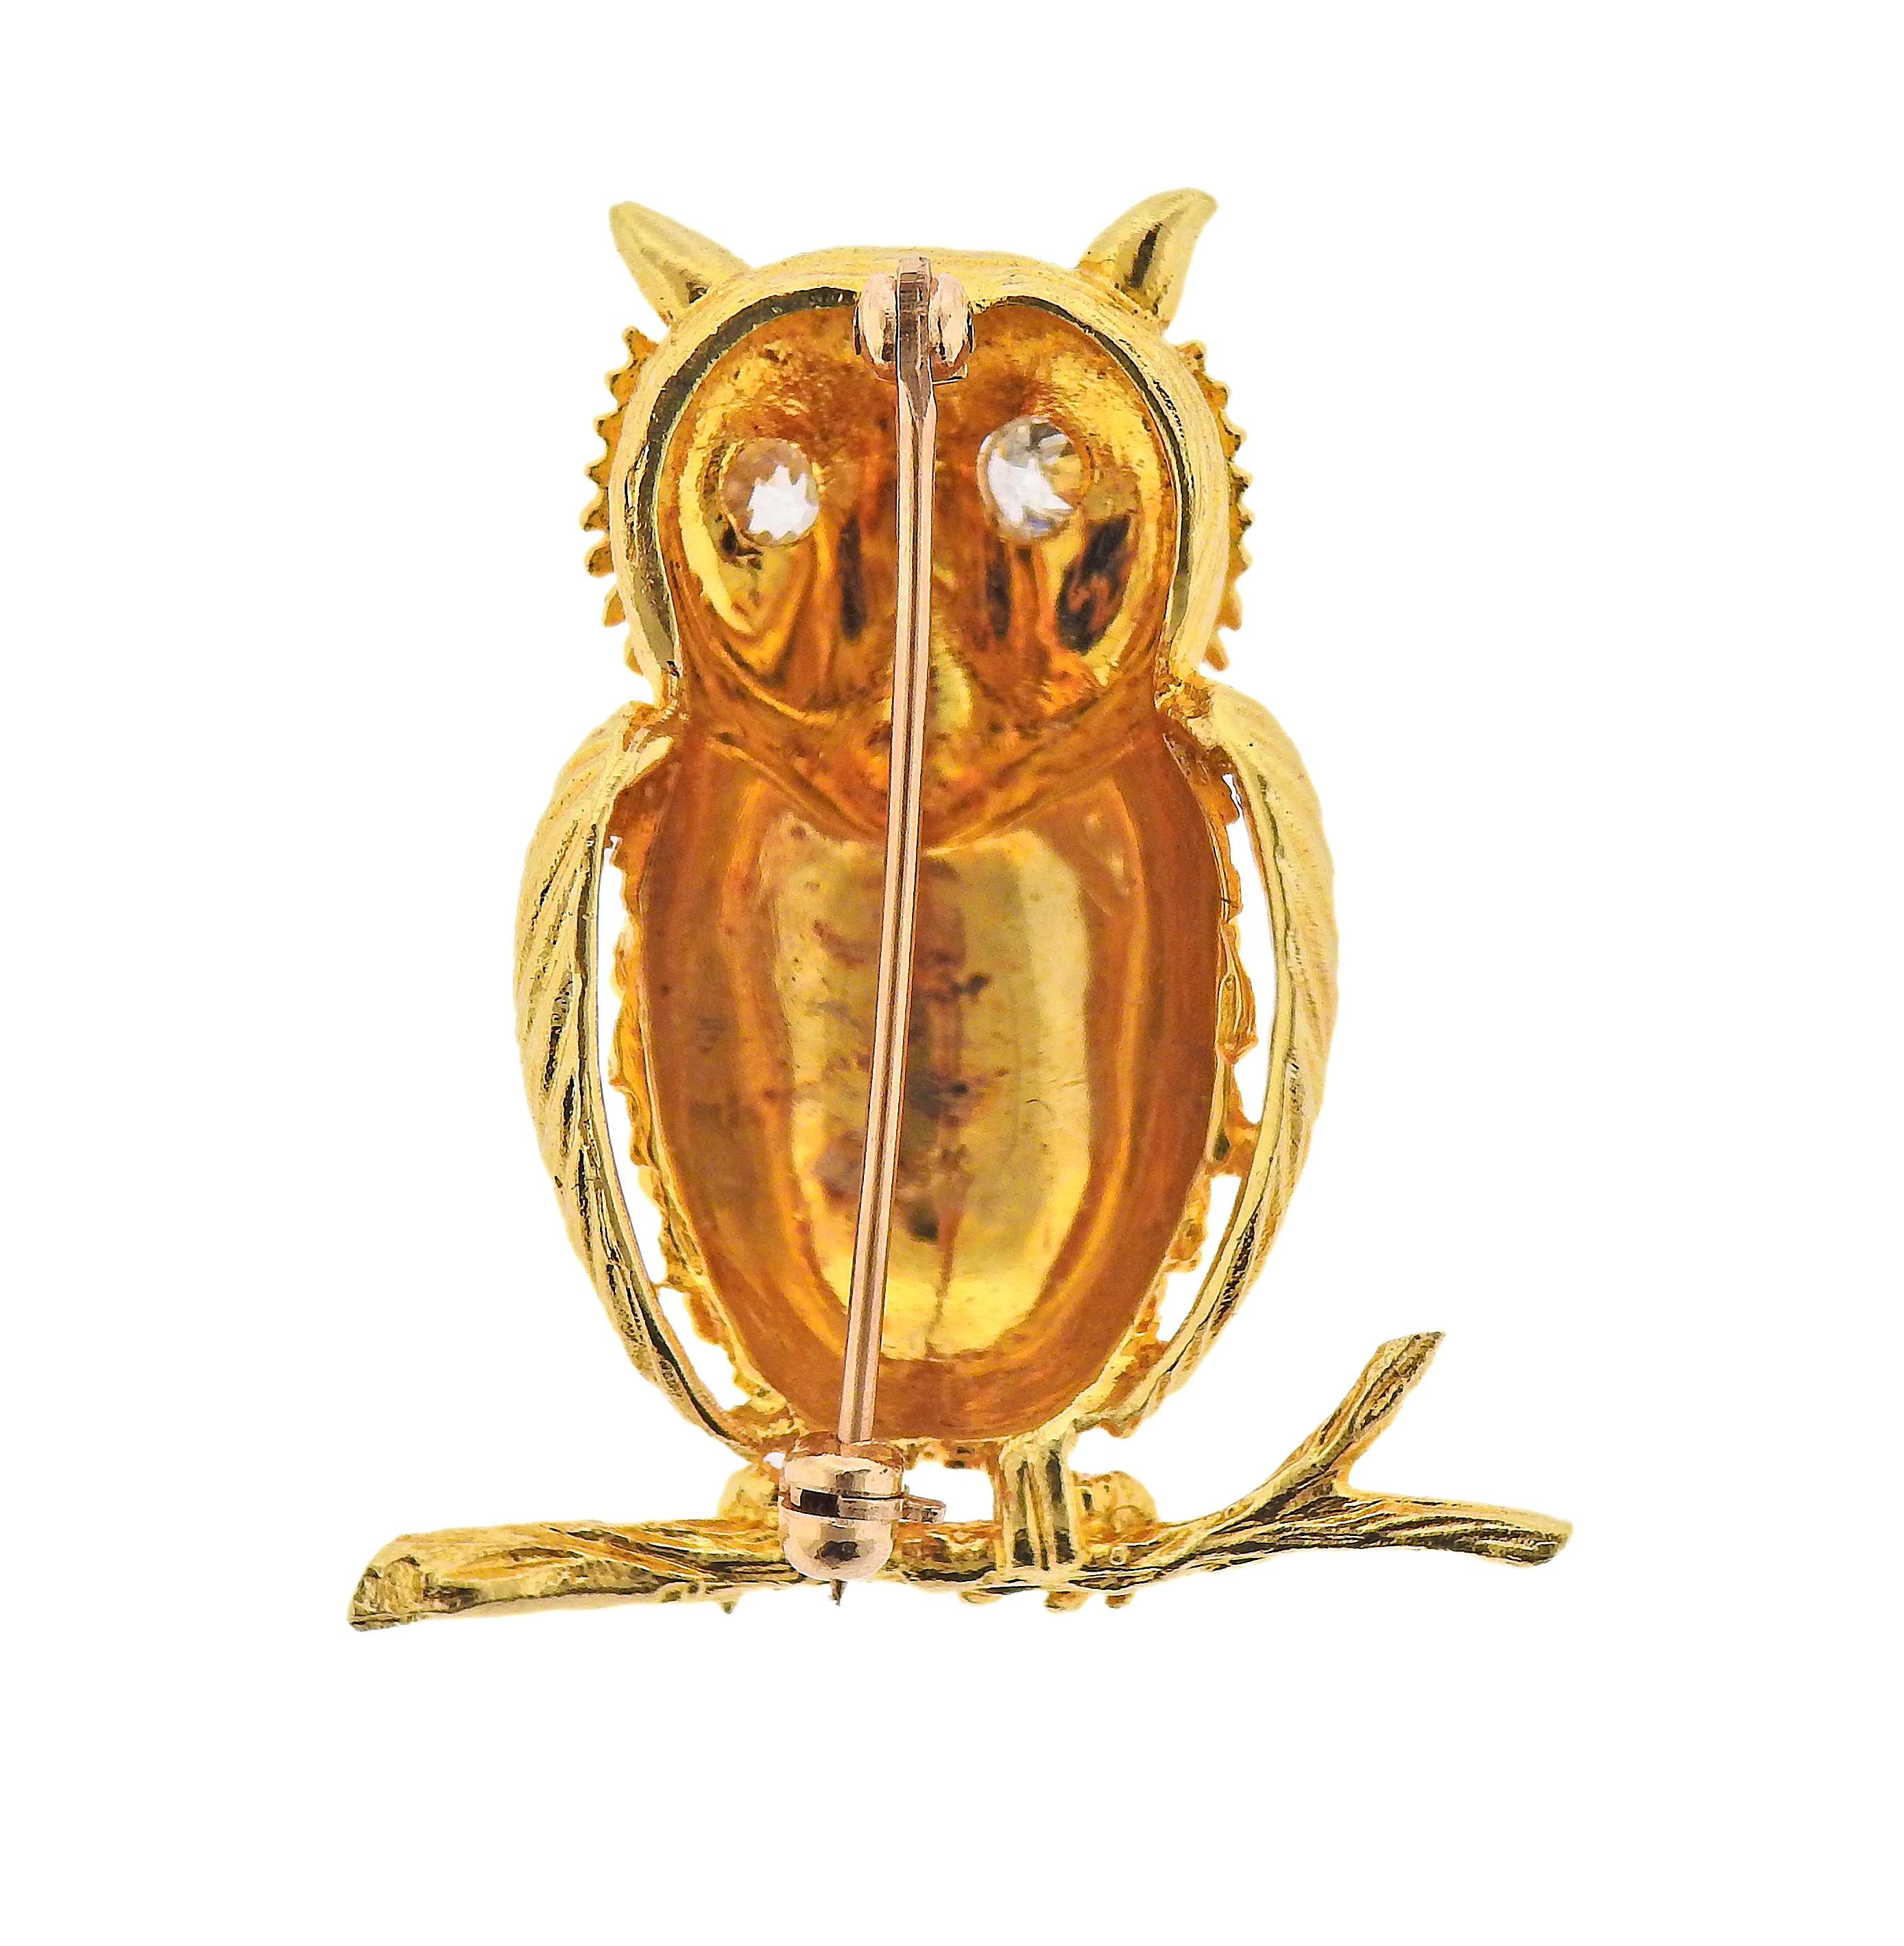 Adorable 18k yellow gold brooch, with diamond eyes - approx. 0.15ct each. Brooch measures 34mm x 30mm. Marked 18k. Weight - 13.4 grams. 